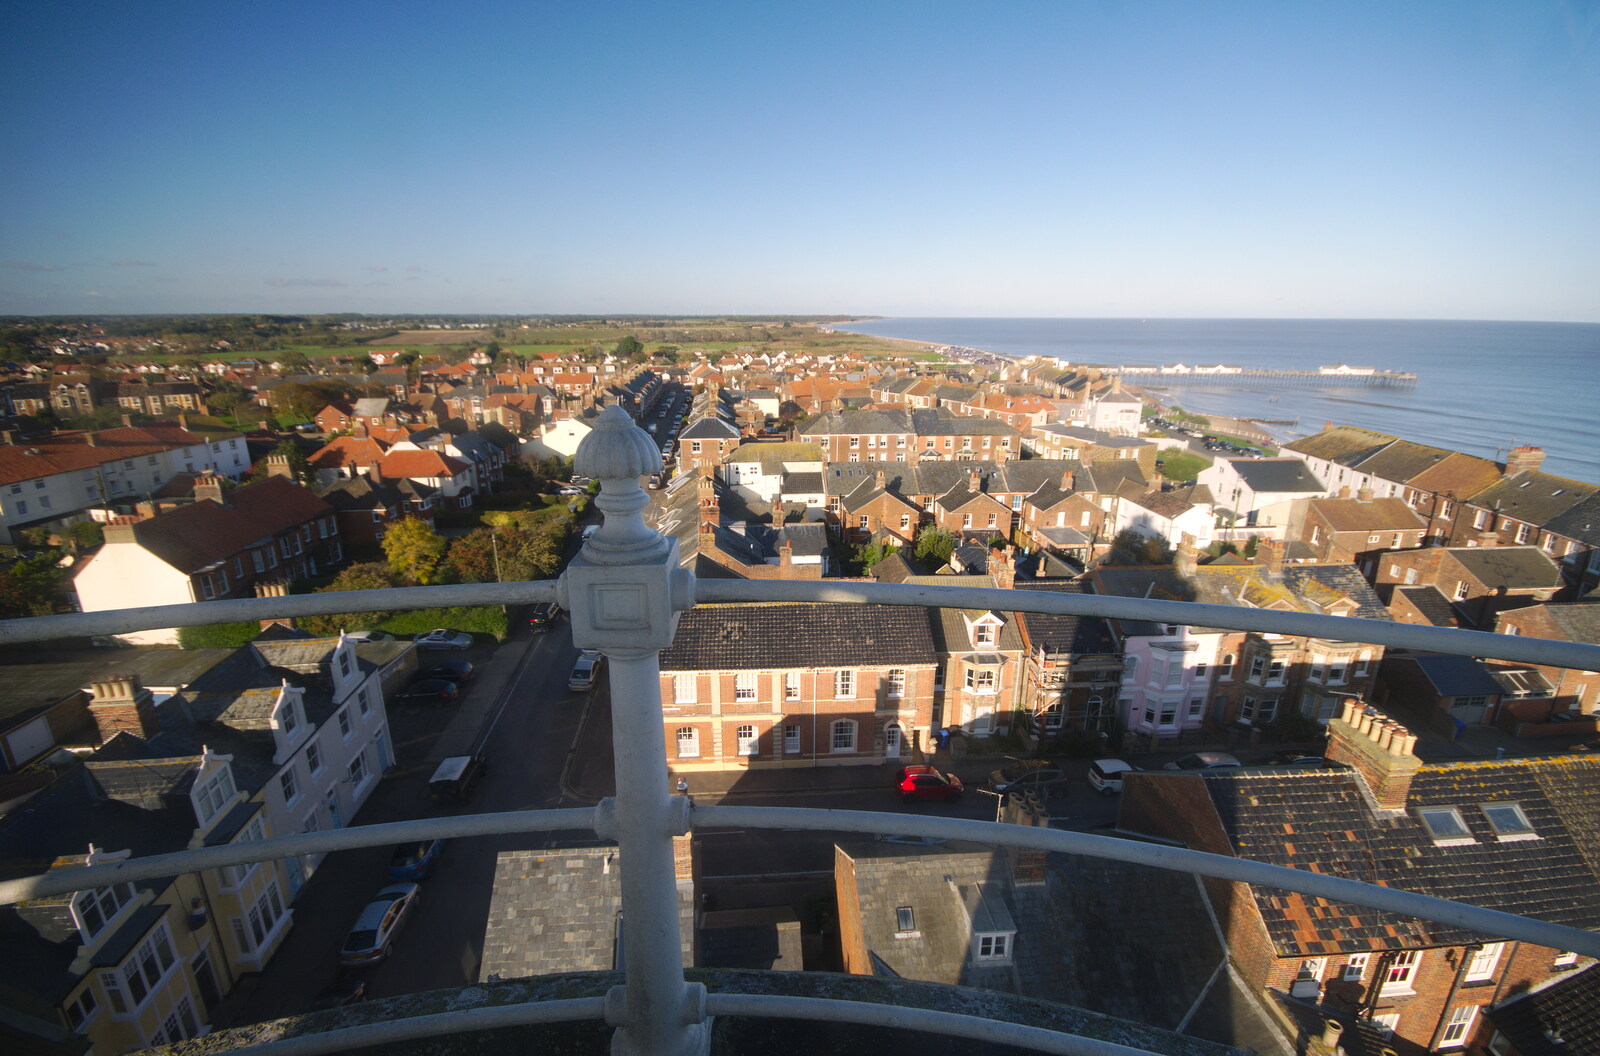 A view over Southwold from A Trip up a Lighthouse, Southwold, Suffolk - 27th October 2019